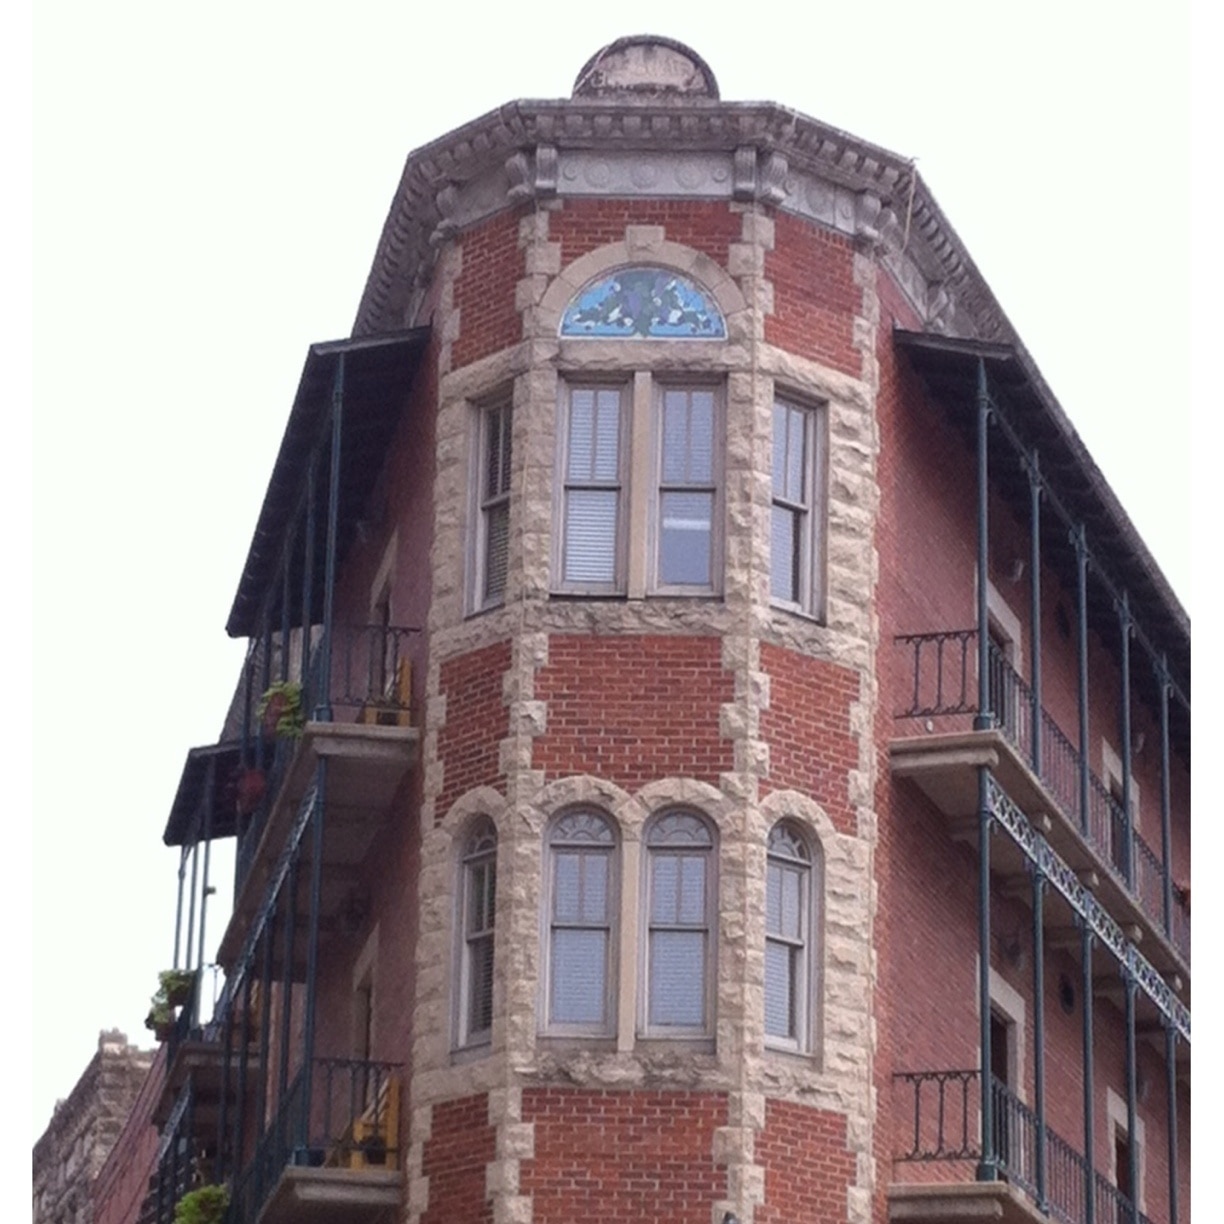 Great old triangle building in downtown Eureka Springs Arkansas 